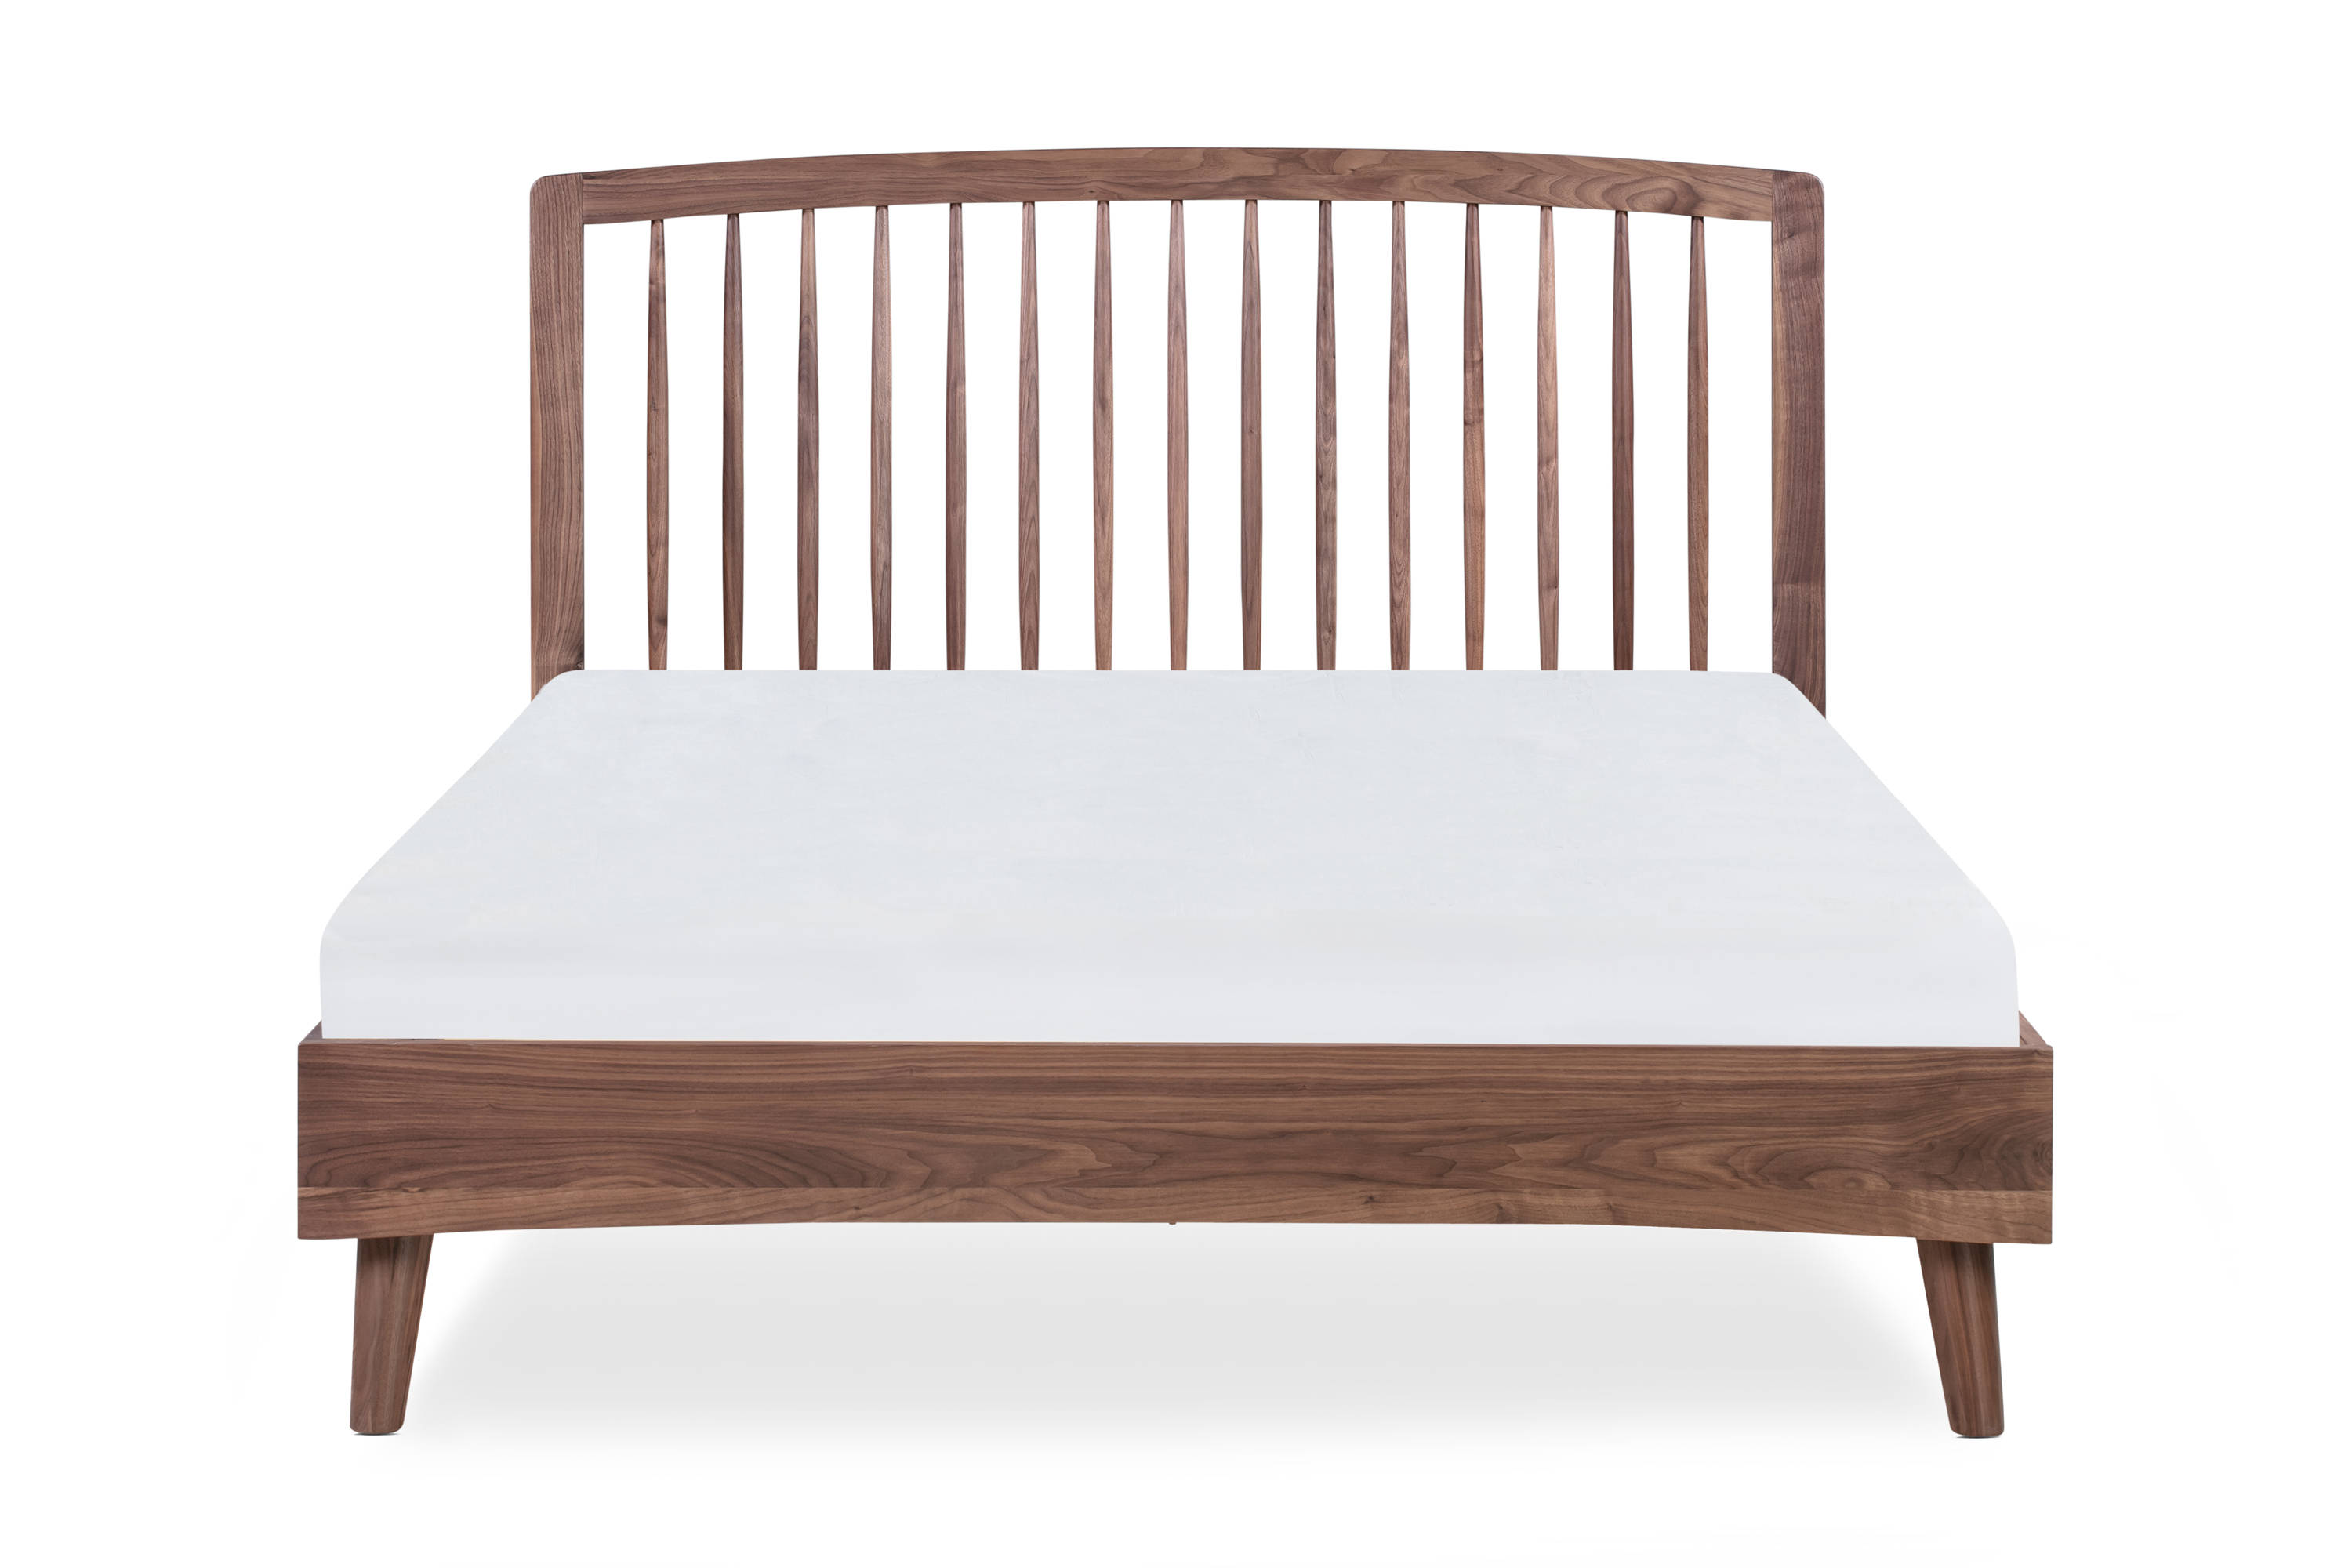 Image shows Modern Spindle Queen Bed Frame in Walnut. A thin edge frames the wood headboard, which is supported by tapered spindles. The bed frame has angled wooden legs.